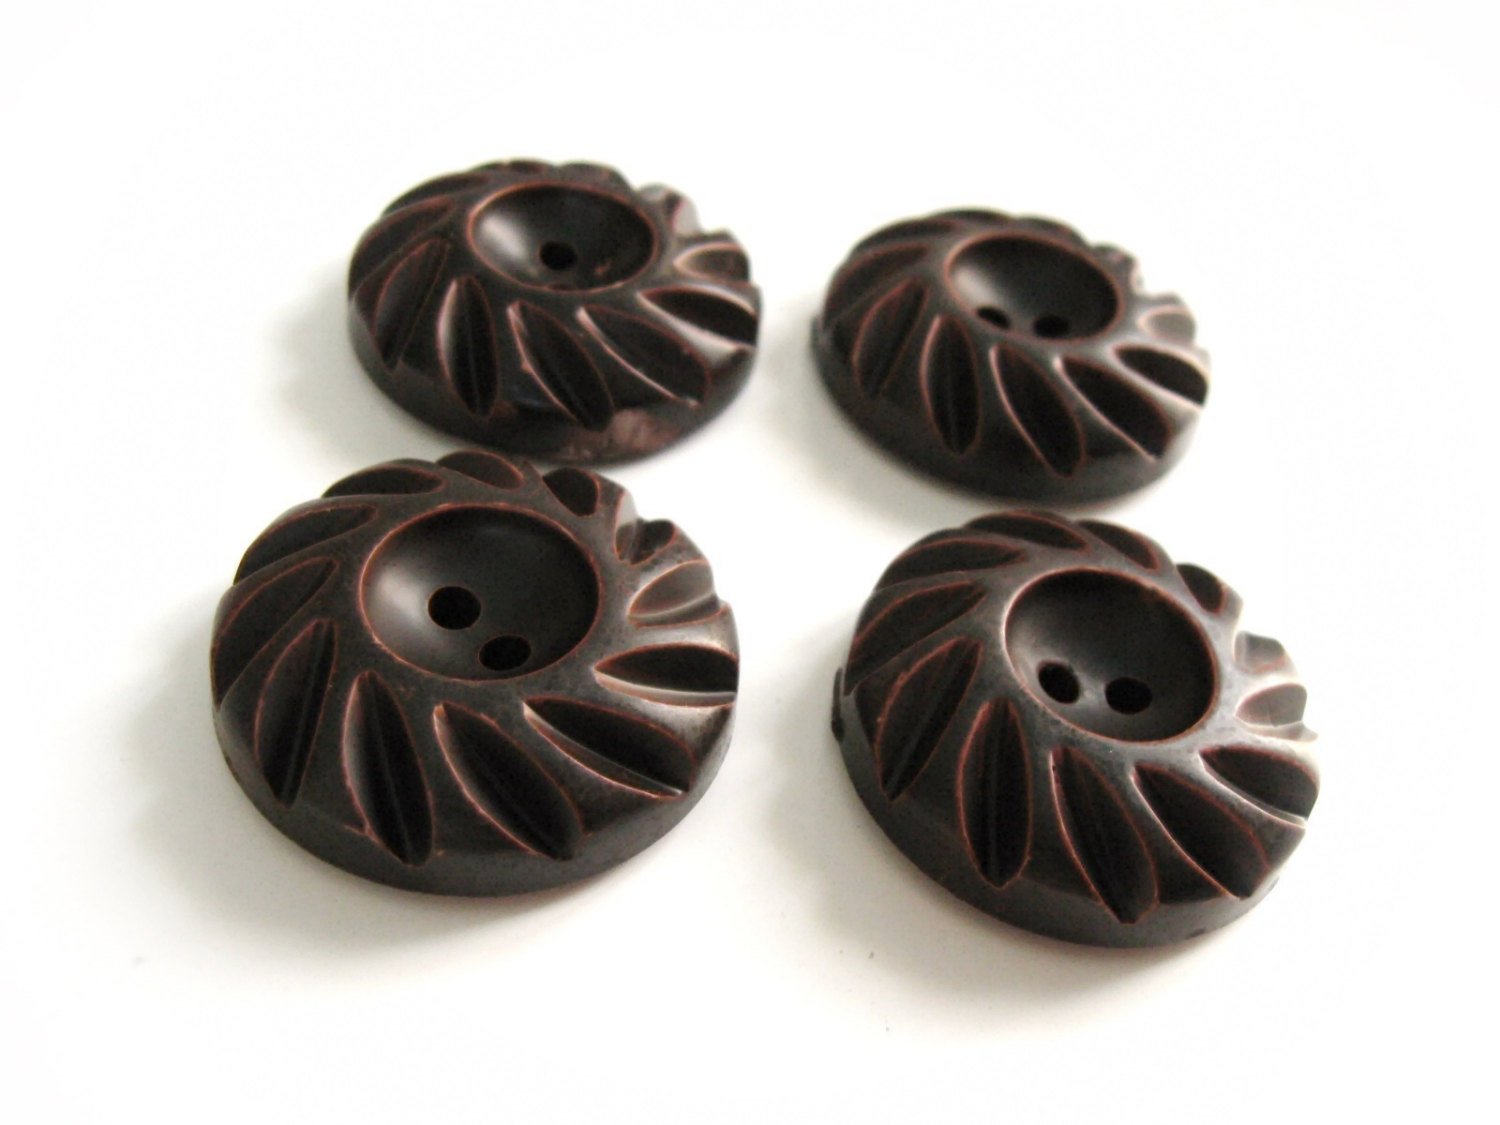 Dark Chocolate Wooden Sewing Buttons 35mm - set of 4 natural wood button